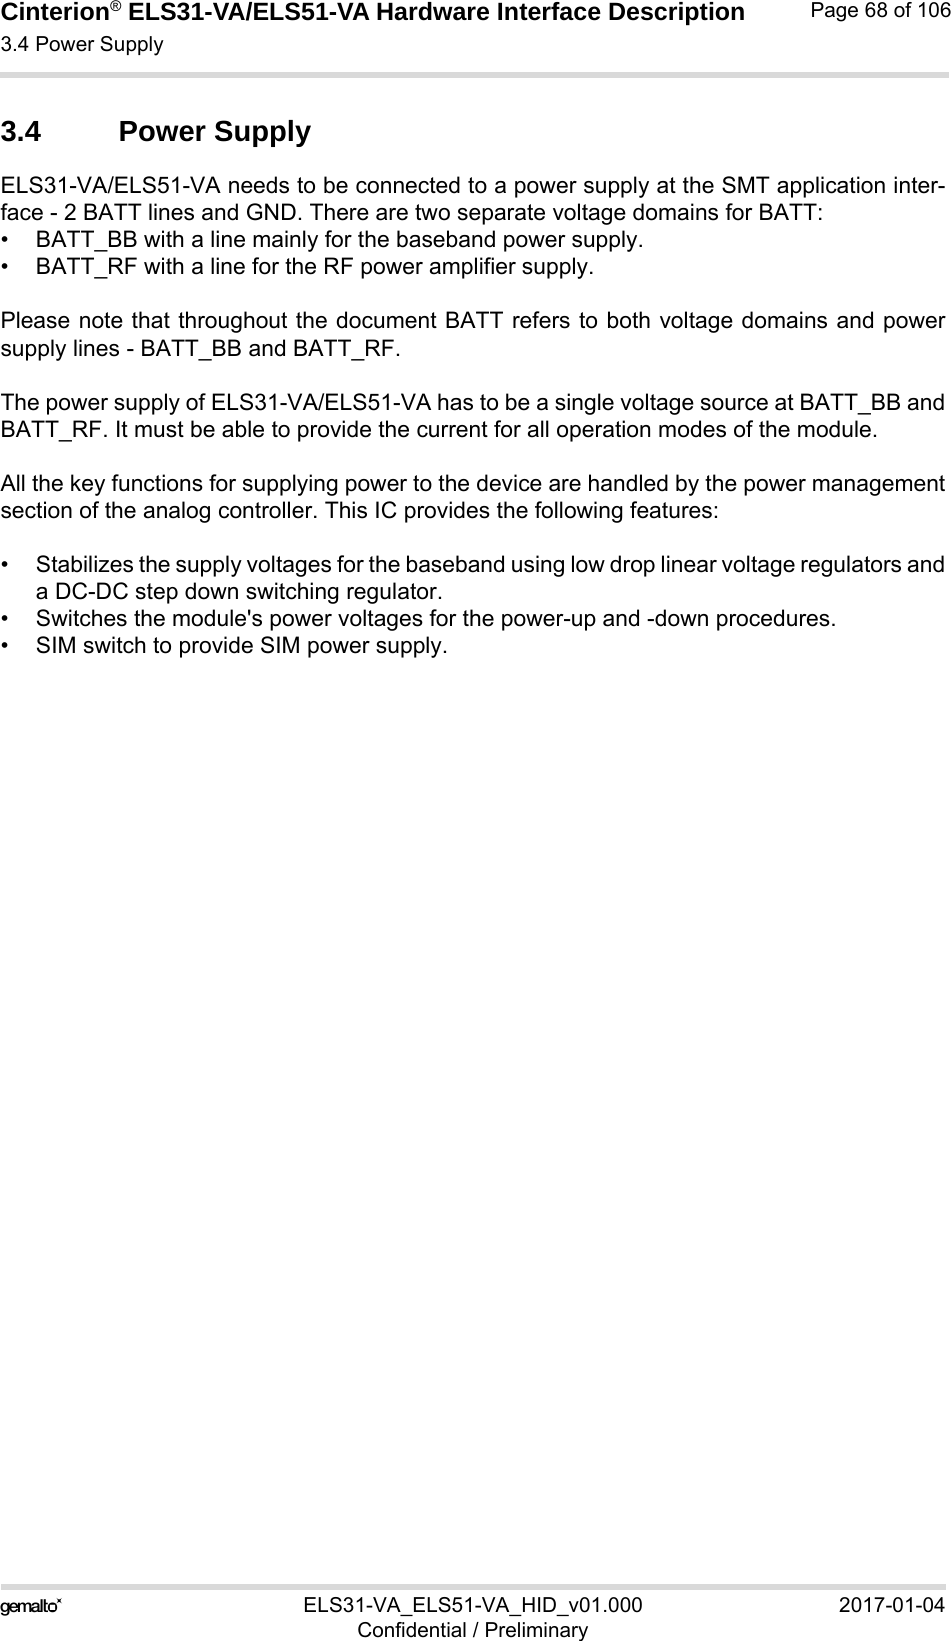 Cinterion® ELS31-VA/ELS51-VA Hardware Interface Description3.4 Power Supply76ELS31-VA_ELS51-VA_HID_v01.000 2017-01-04Confidential / PreliminaryPage 68 of 1063.4 Power SupplyELS31-VA/ELS51-VA needs to be connected to a power supply at the SMT application inter-face - 2 BATT lines and GND. There are two separate voltage domains for BATT:• BATT_BB with a line mainly for the baseband power supply.• BATT_RF with a line for the RF power amplifier supply.Please note that throughout the document BATT refers to both voltage domains and powersupply lines - BATT_BB and BATT_RF.The power supply of ELS31-VA/ELS51-VA has to be a single voltage source at BATT_BB andBATT_RF. It must be able to provide the current for all operation modes of the module. All the key functions for supplying power to the device are handled by the power managementsection of the analog controller. This IC provides the following features:• Stabilizes the supply voltages for the baseband using low drop linear voltage regulators anda DC-DC step down switching regulator.• Switches the module&apos;s power voltages for the power-up and -down procedures.• SIM switch to provide SIM power supply.